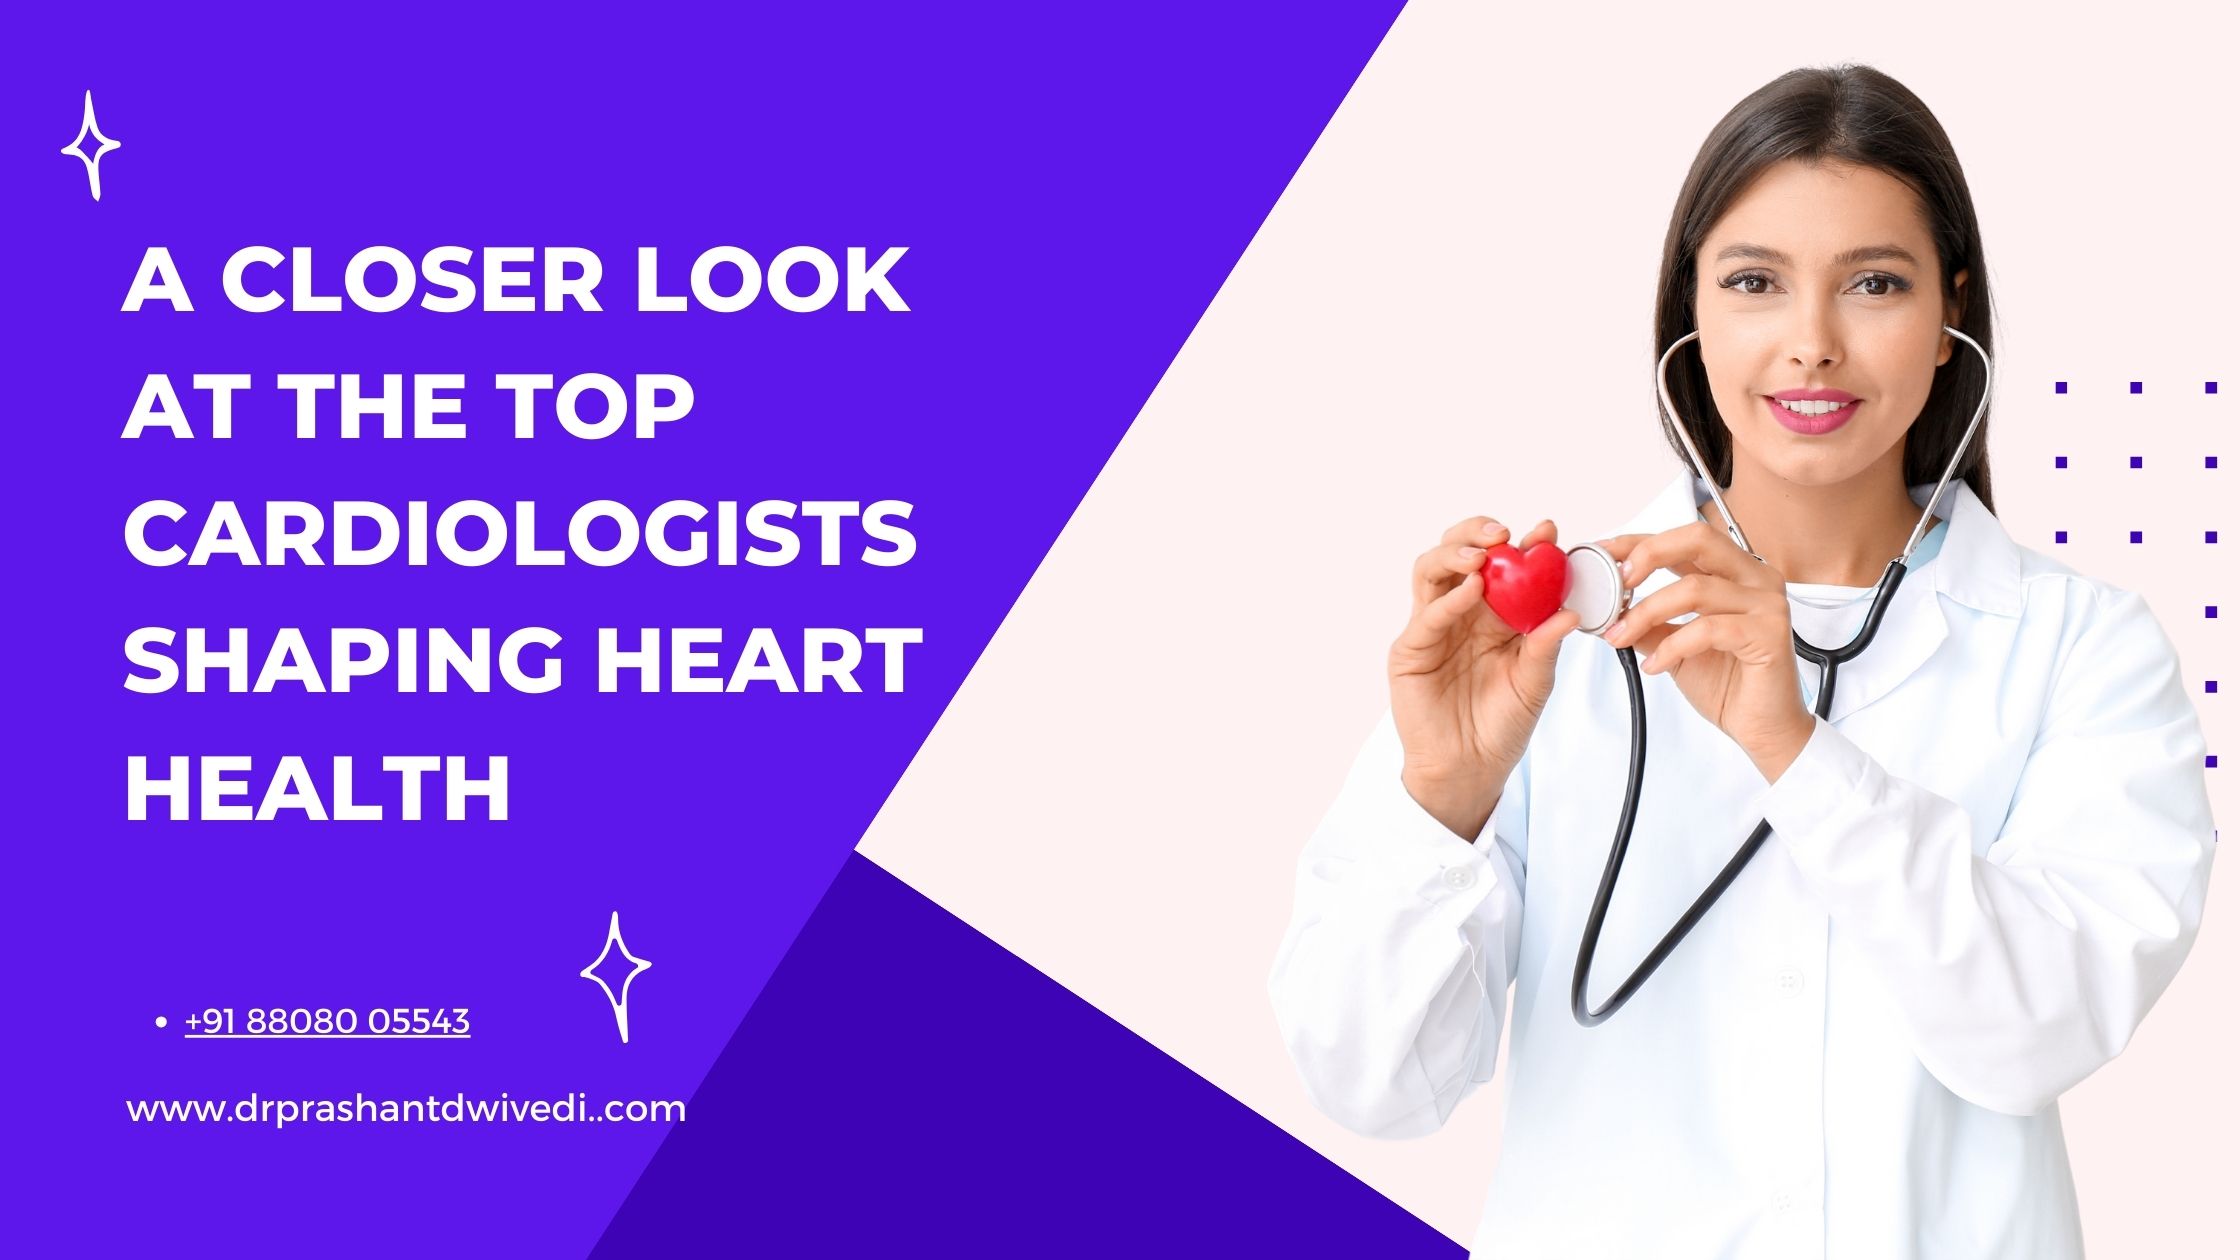 A Closer Look at the Top Cardiologists Shaping Heart Health